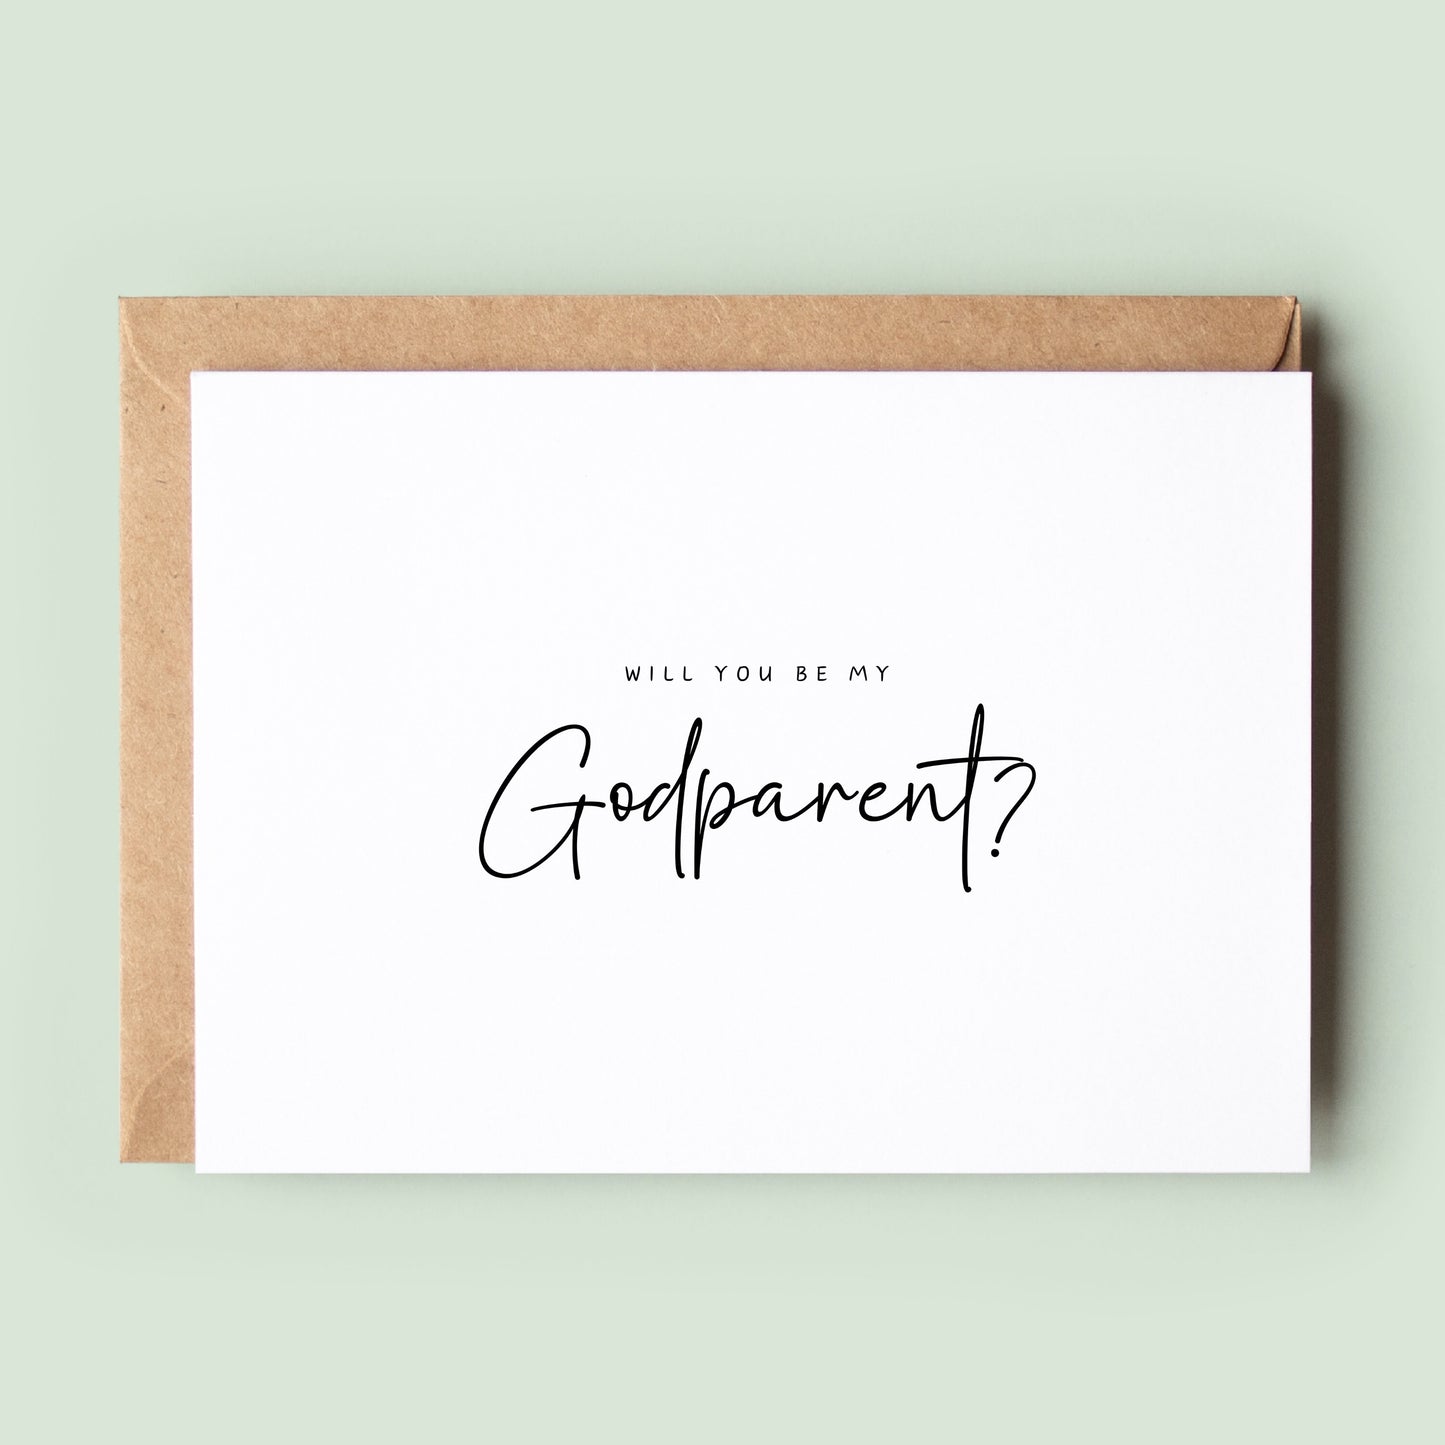 Simple Will You Be My Godfather Card, God Father Proposal Card, God Parent Card, Christening Gift, Baptism Gift, Godparent Asking Card #142